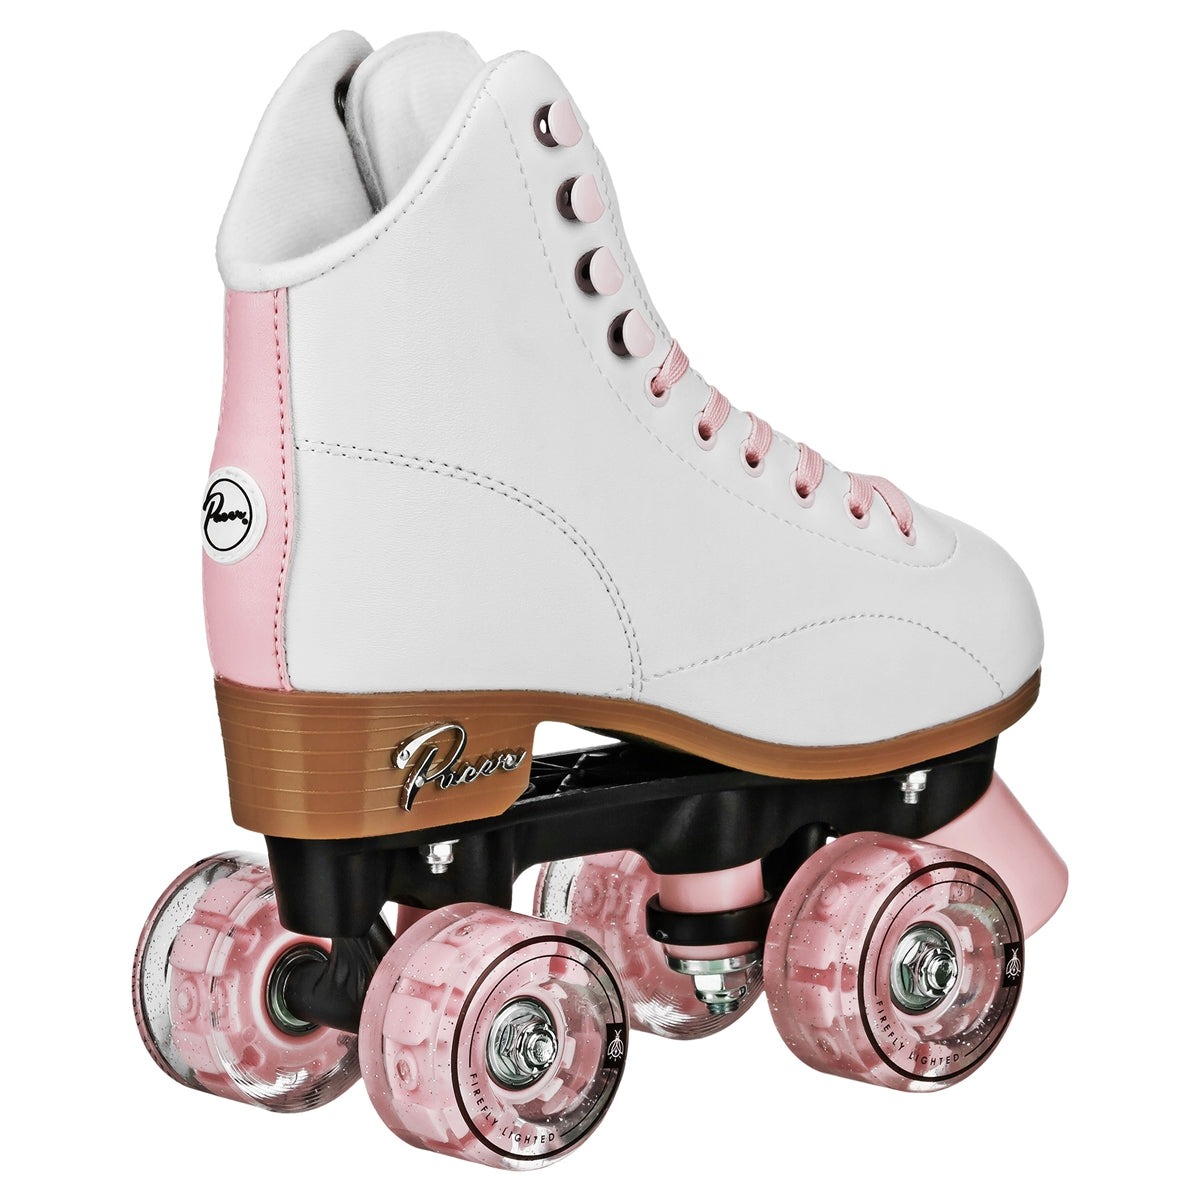 Pacer Comet Youth’s Skates